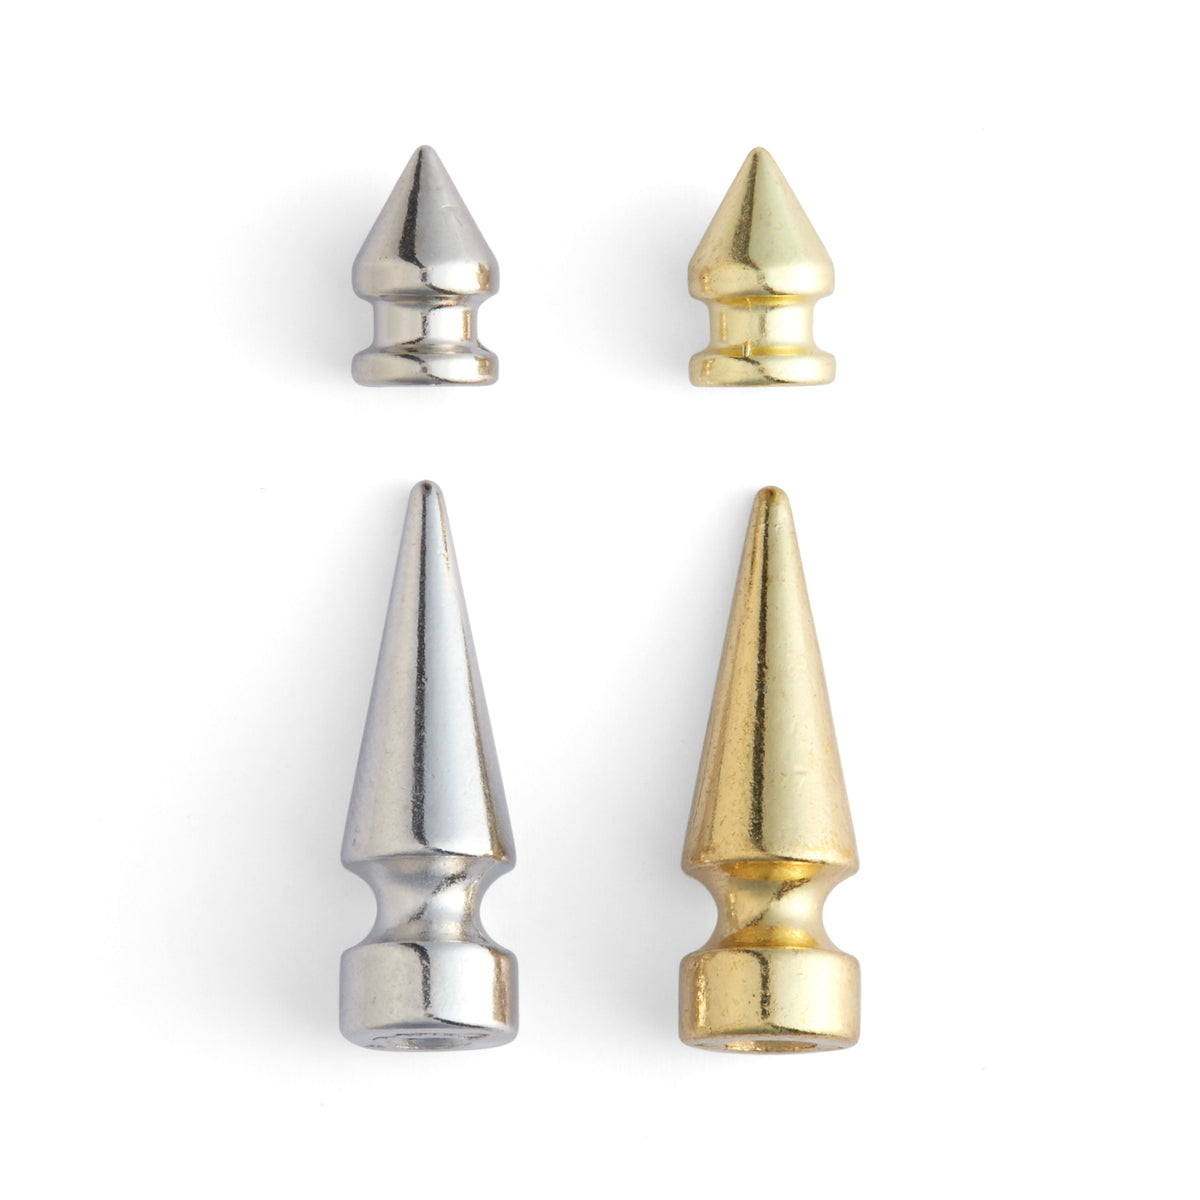 13mm Cone Spike Studs for Clothing Metal Spikes and Studs 